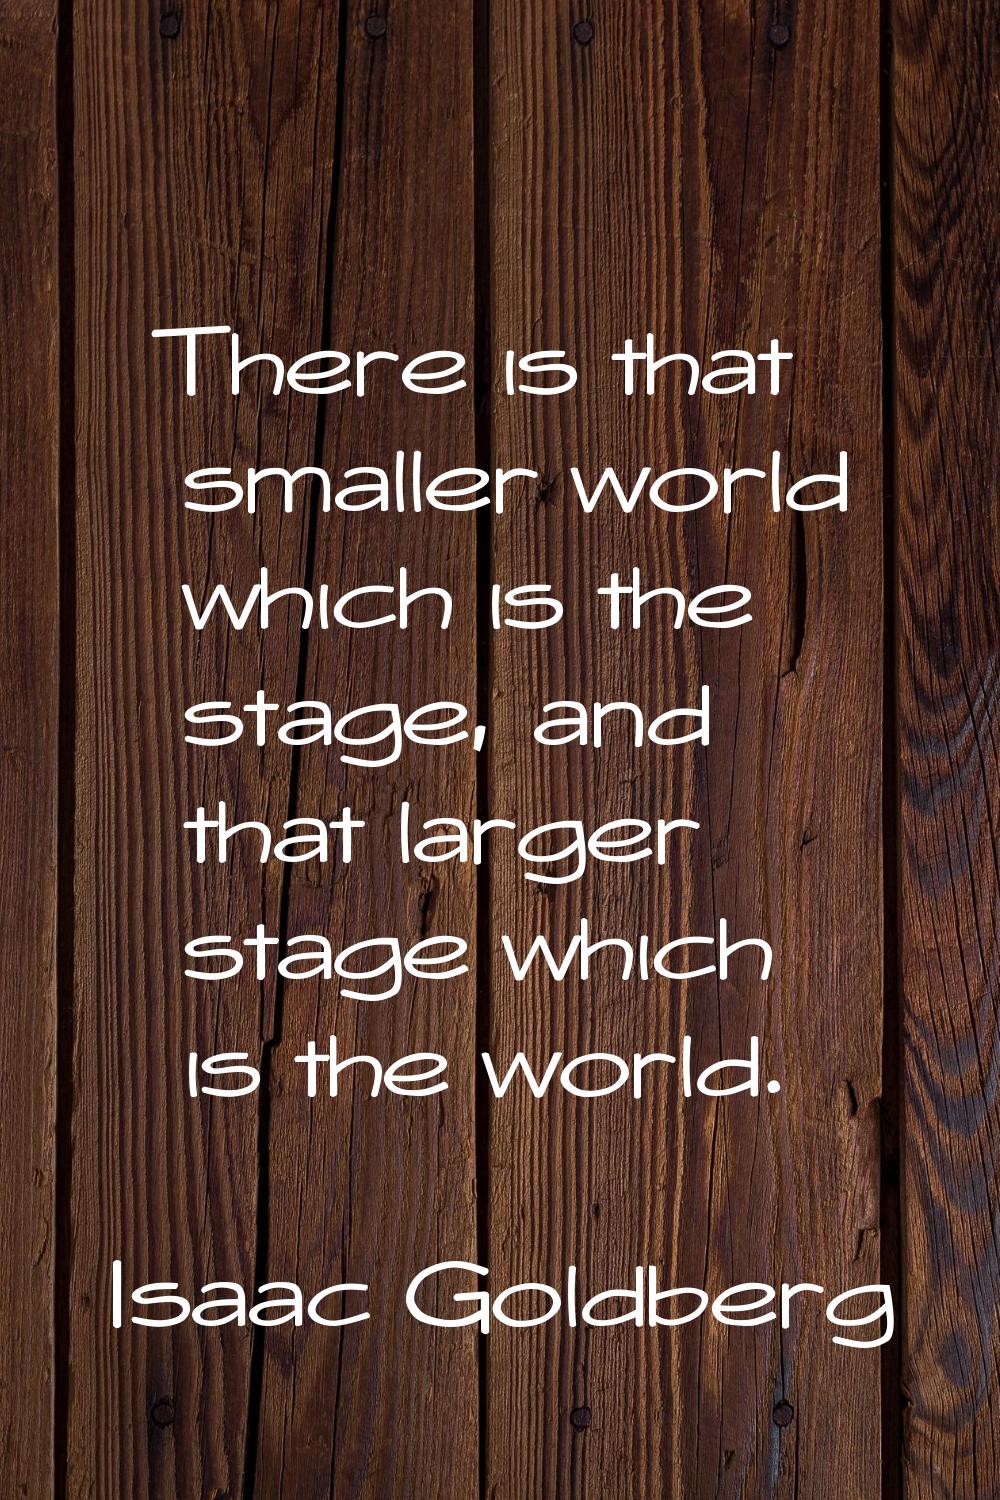 There is that smaller world which is the stage, and that larger stage which is the world.